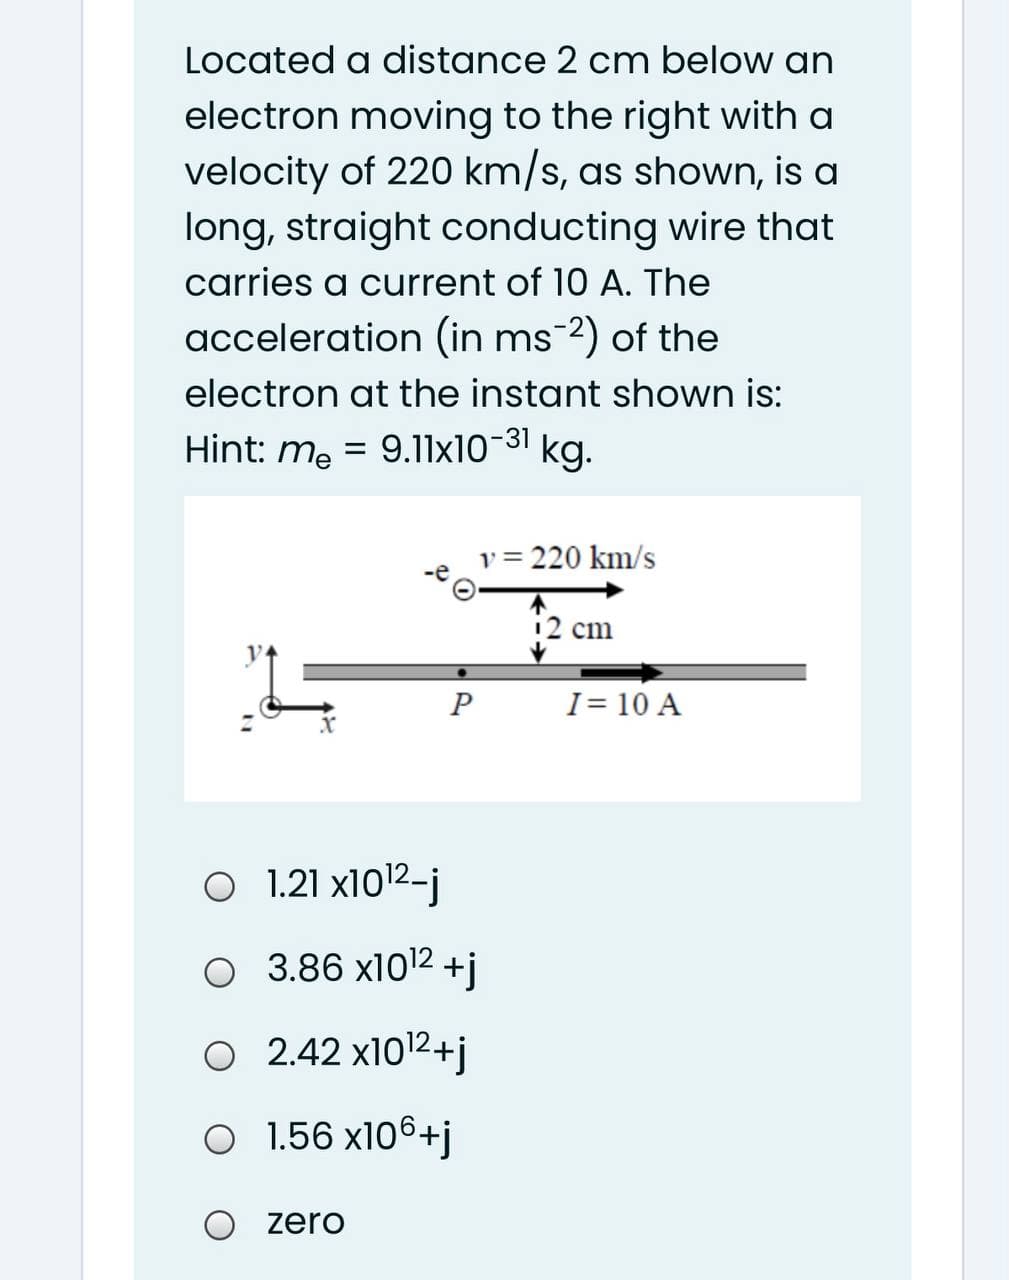 Located a distance 2 cm below an
electron moving to the right with a
velocity of 220 km/s, as shown, is a
long, straight conducting wire that
carries a current of 10 A. The
acceleration (in ms-2) of the
electron at the instant shown is:
Hint: me = 9.l1x10-31
kg.
v = 220 km/s
12 cm
I= 10 A
O 1.21 x1012-j
O 3.86 x1012 +j
O 2.42 x1012+j
O 1.56 x106+j
zero
